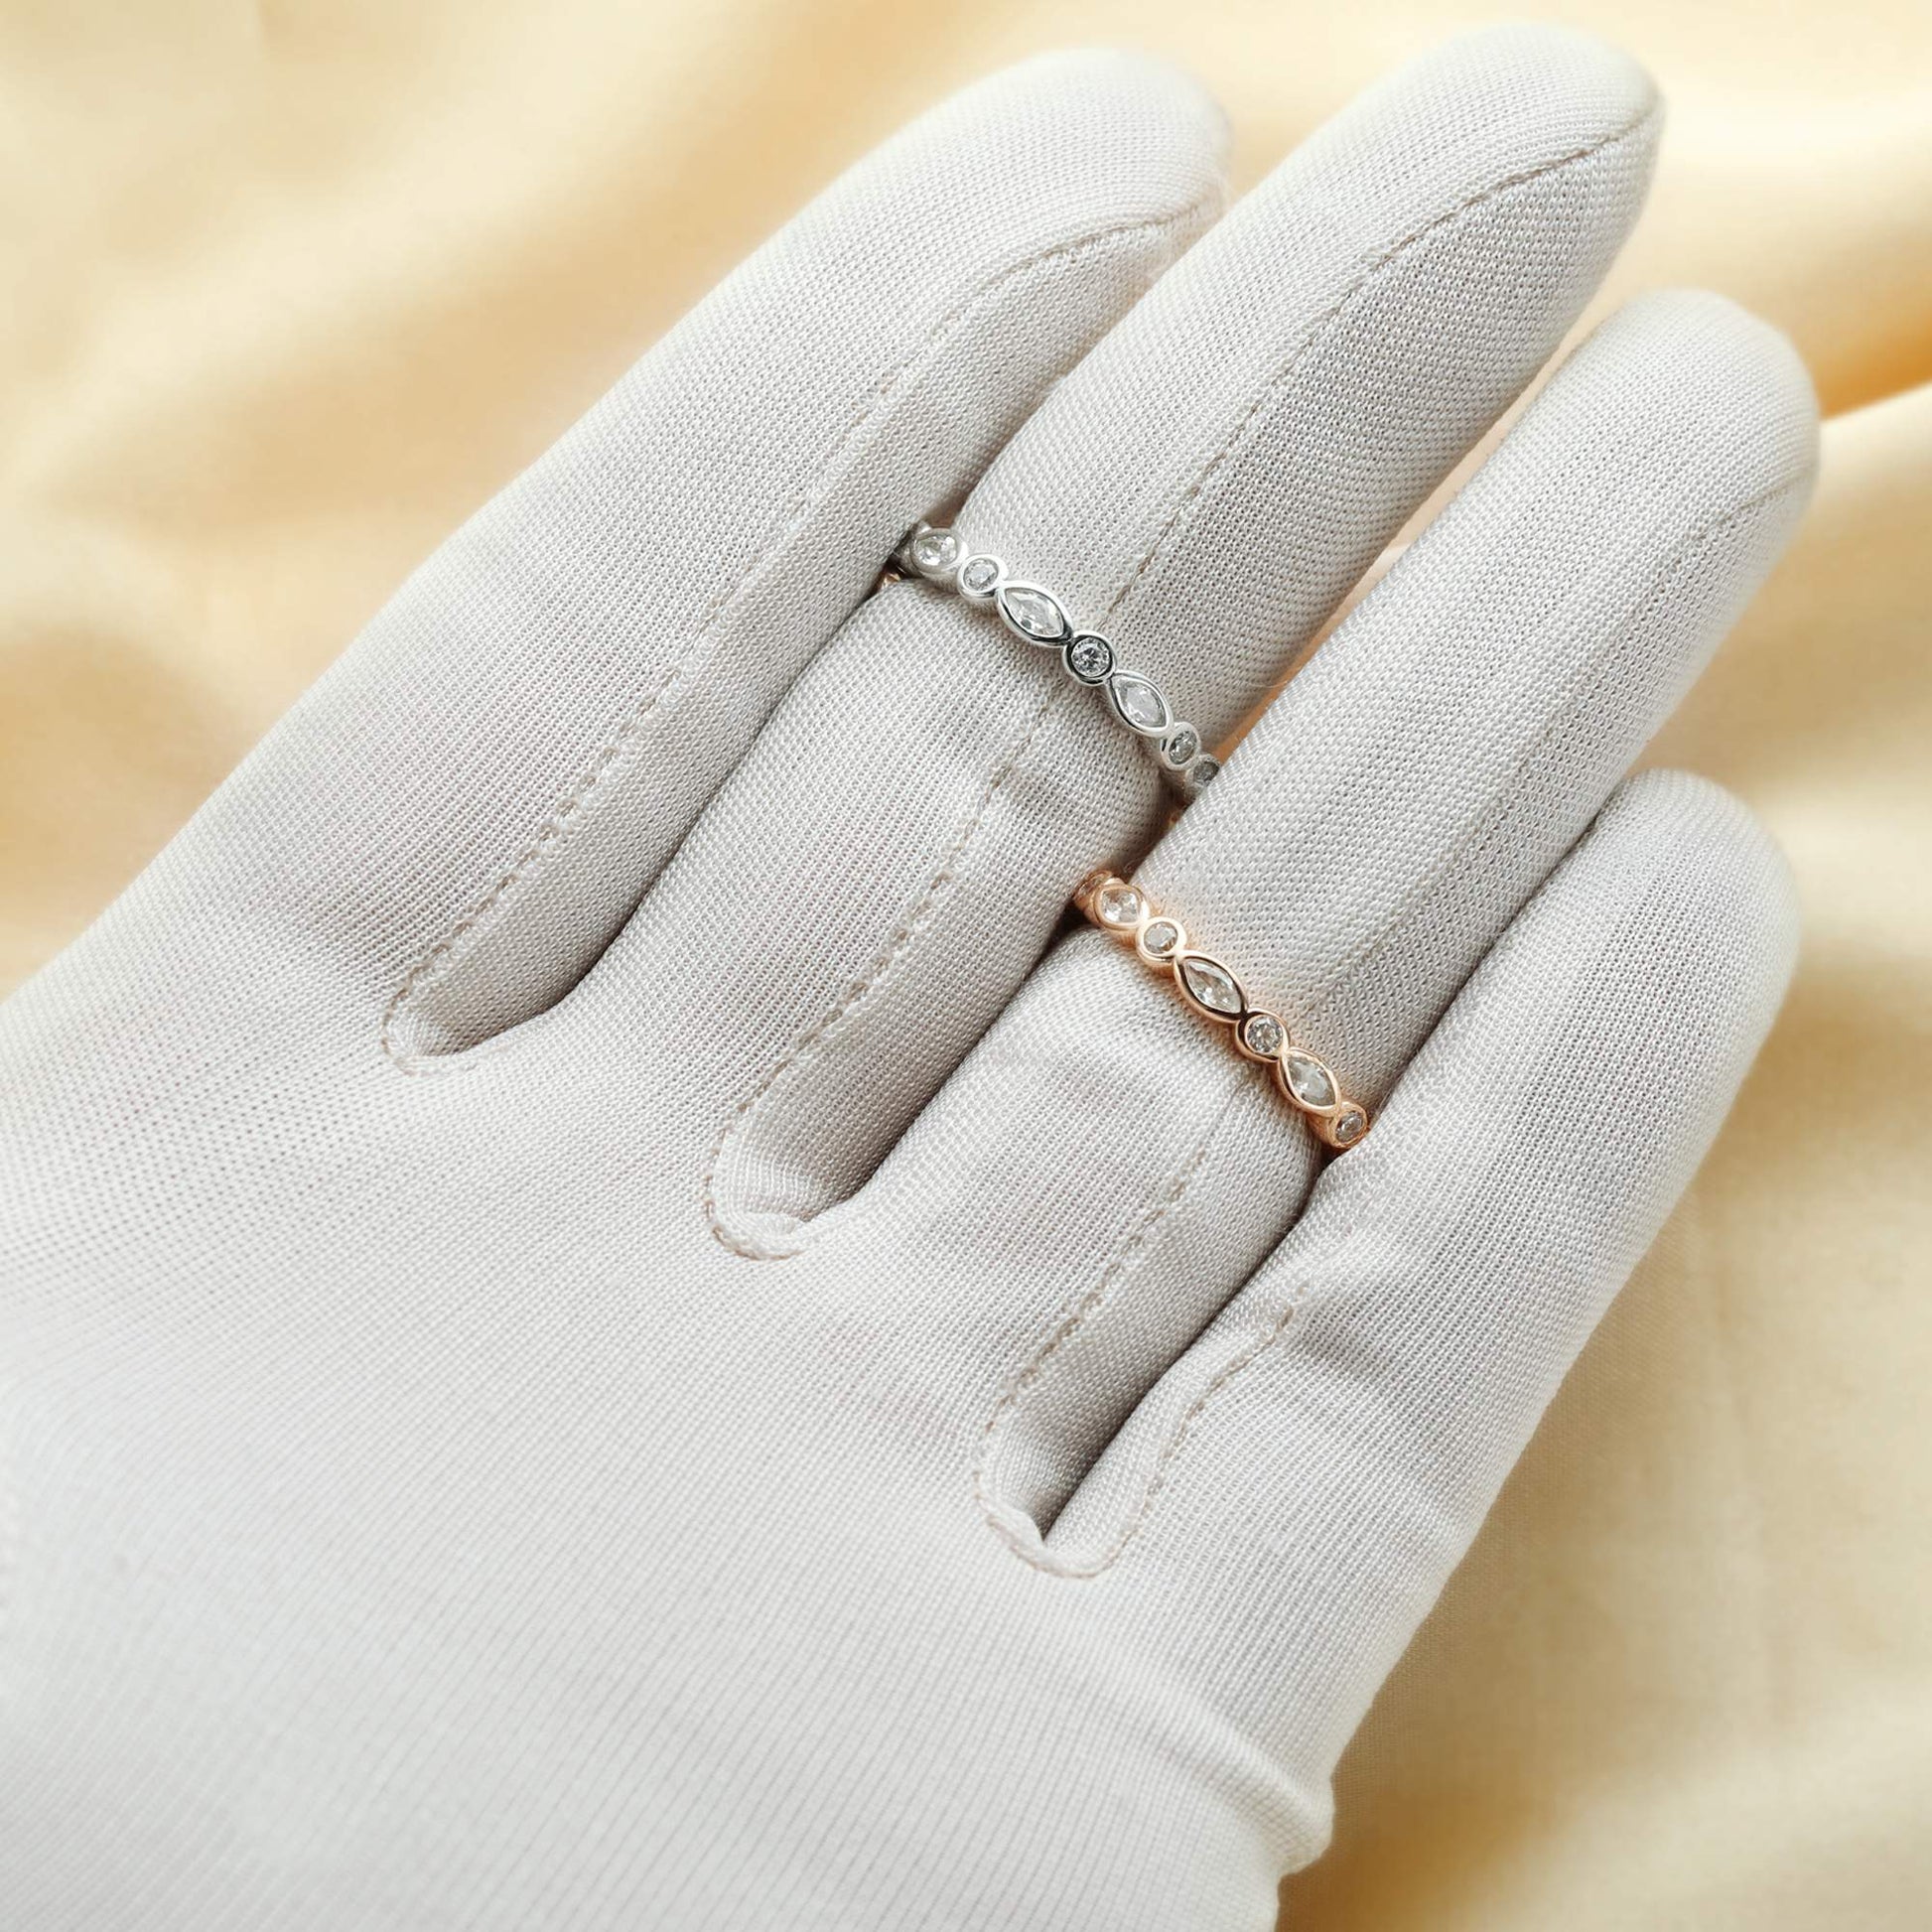 A hand wearing one silver and one rose gold ring bezel set with alternating marquise and round cut clear gems.